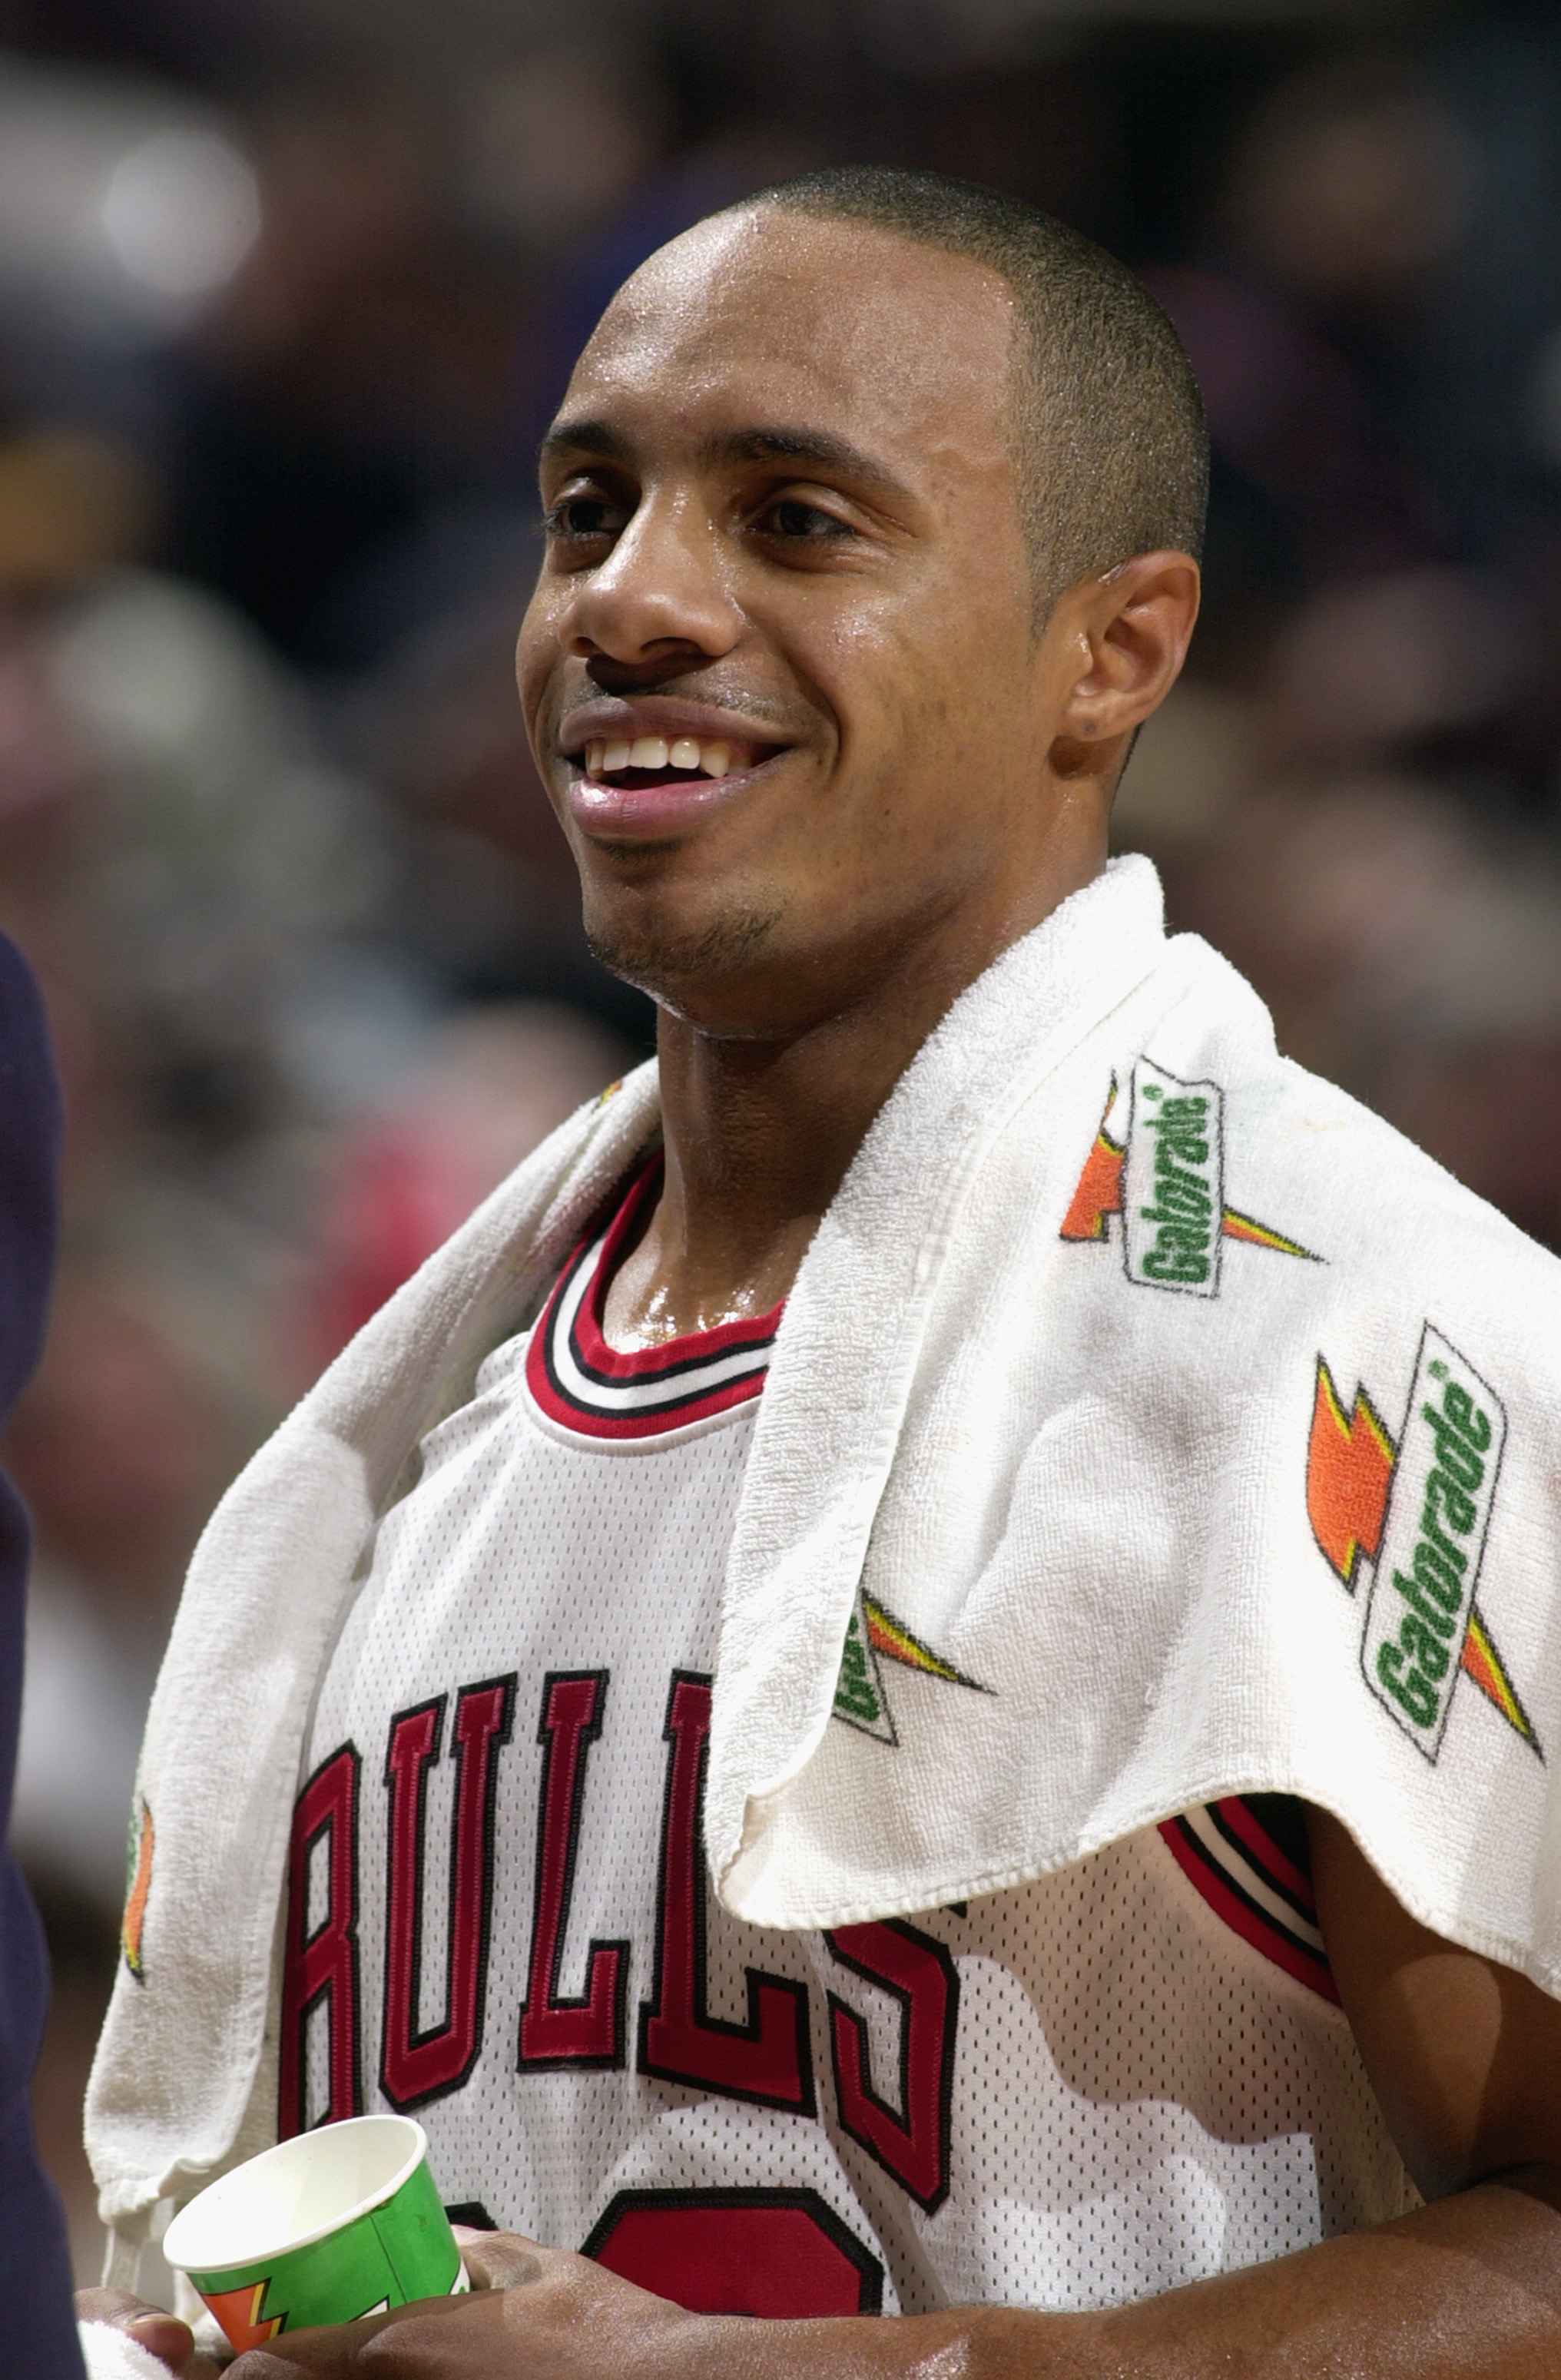 CHICAGO - JANUARY 13:  Jay Williams #22 of the Chicago Bulls smiles during the NBA game against the New York Knicks at the United Center on January 13, 2003 in Chicago, Illinois.  The Bulls won 101-94.  NOTE TO USER:  User expressly acknowledges and agree